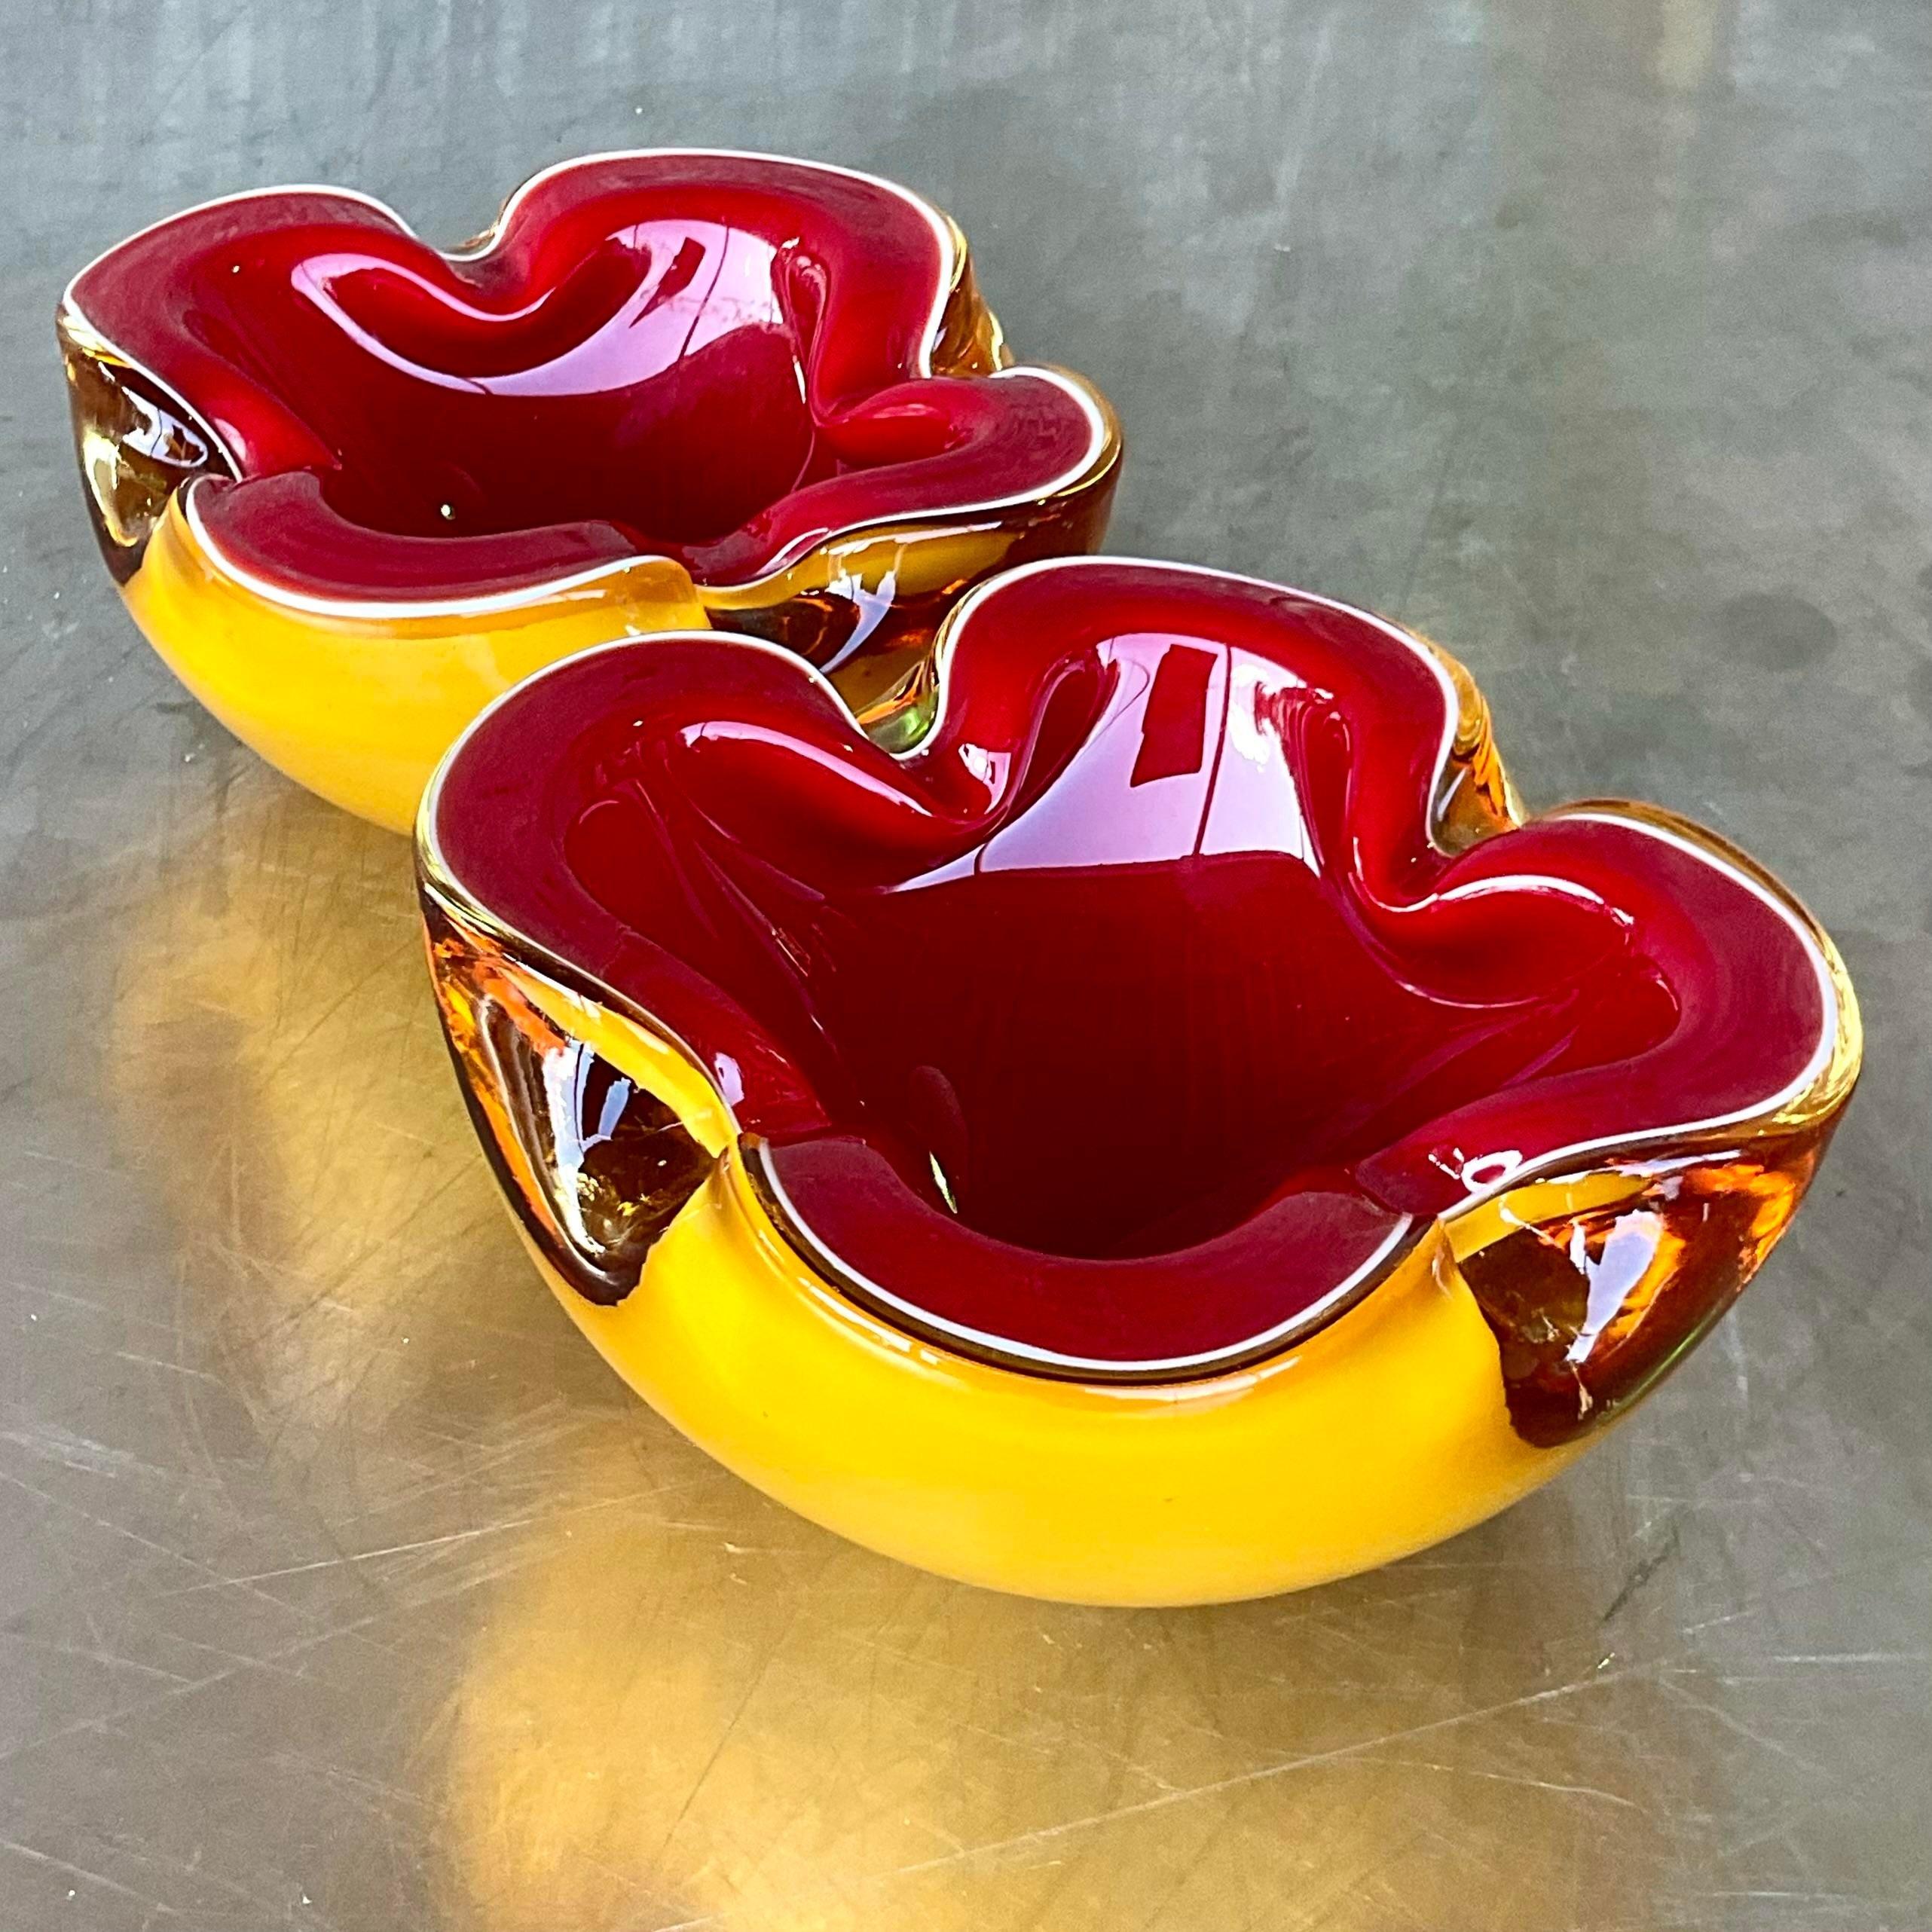 Elevate your table setting with this exquisite pair of Vintage Italian Murano Barbini attributed Glass Bowls. Infused with Old-World charm and artisanal craftsmanship, they effortlessly blend Italian elegance with American sophistication, making a